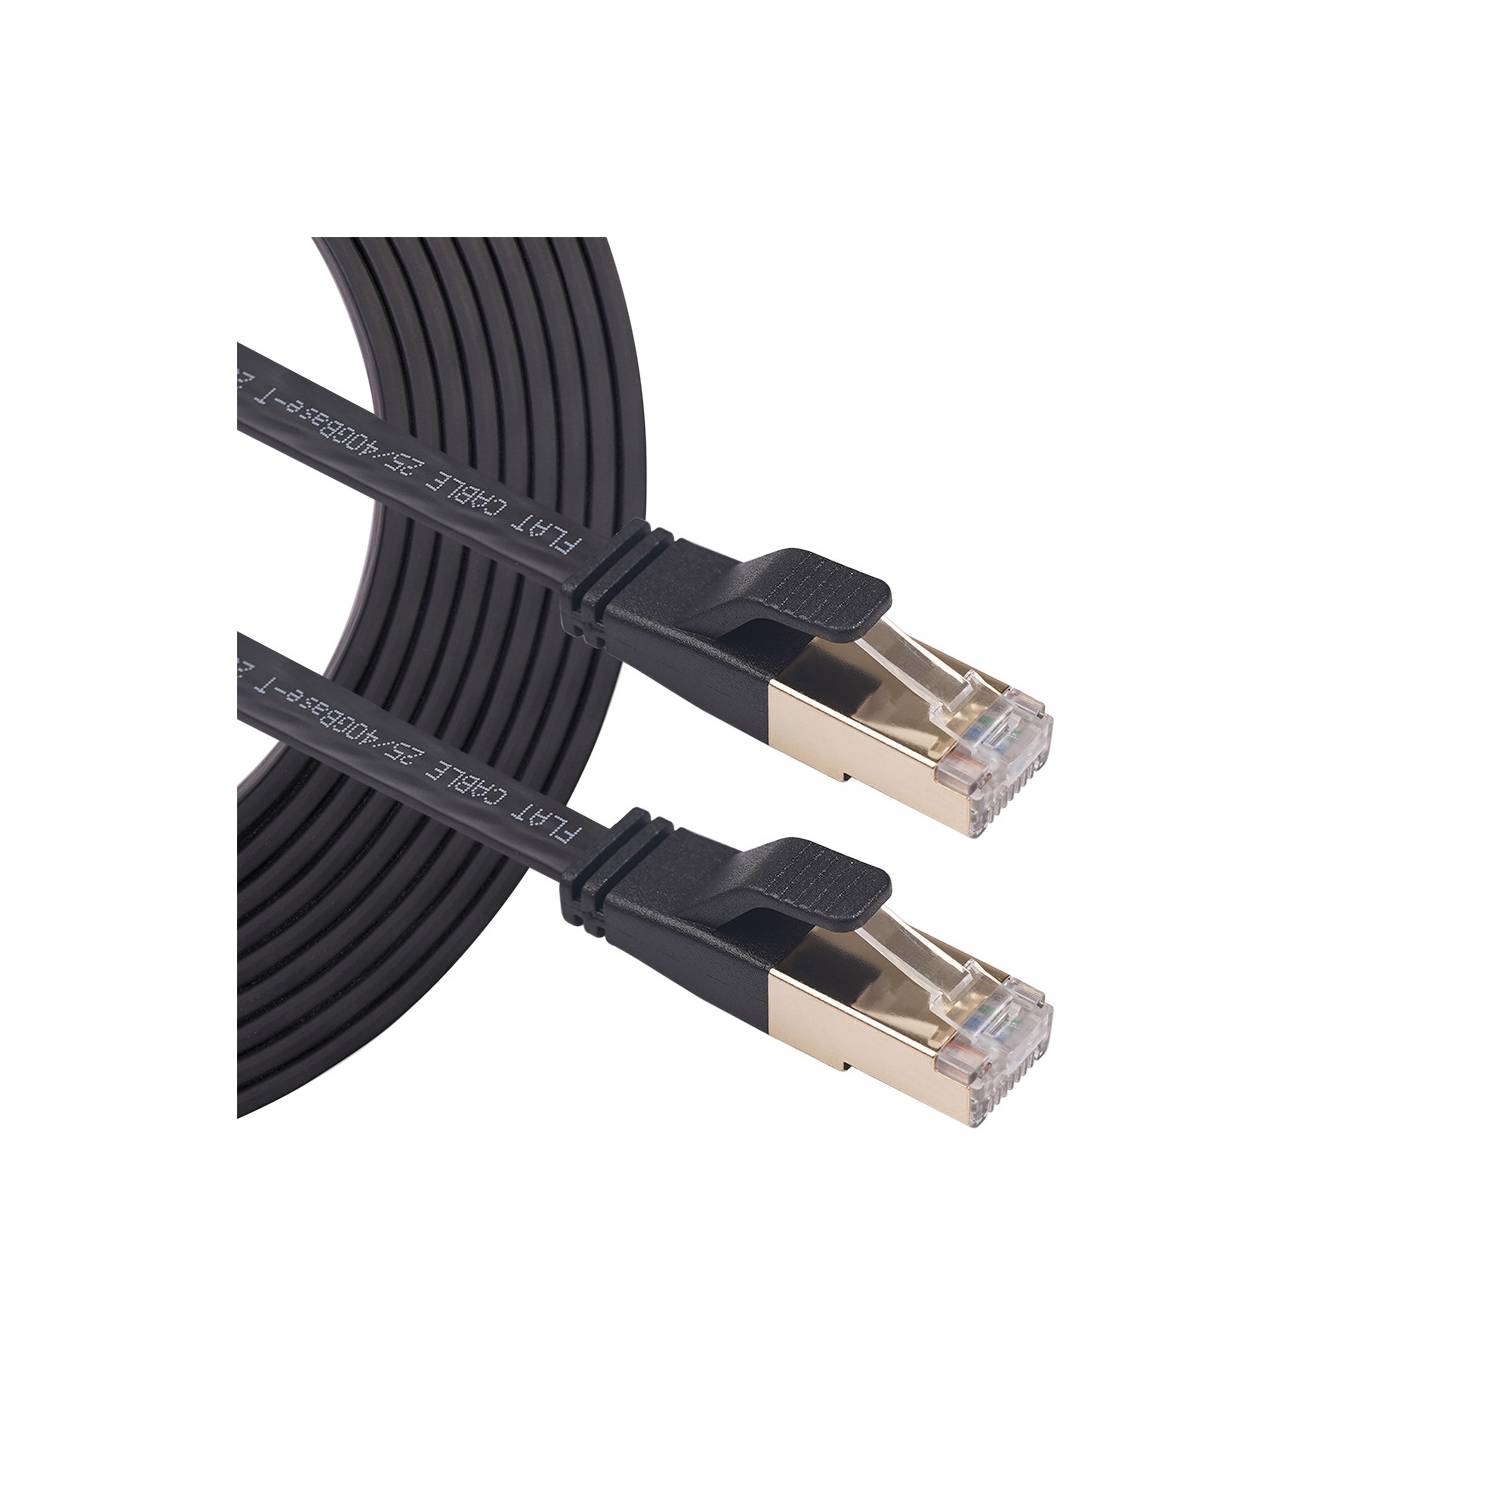 Cable Red Rj45 Ethernet Cat 8 Categoria 8 - 8 Metros